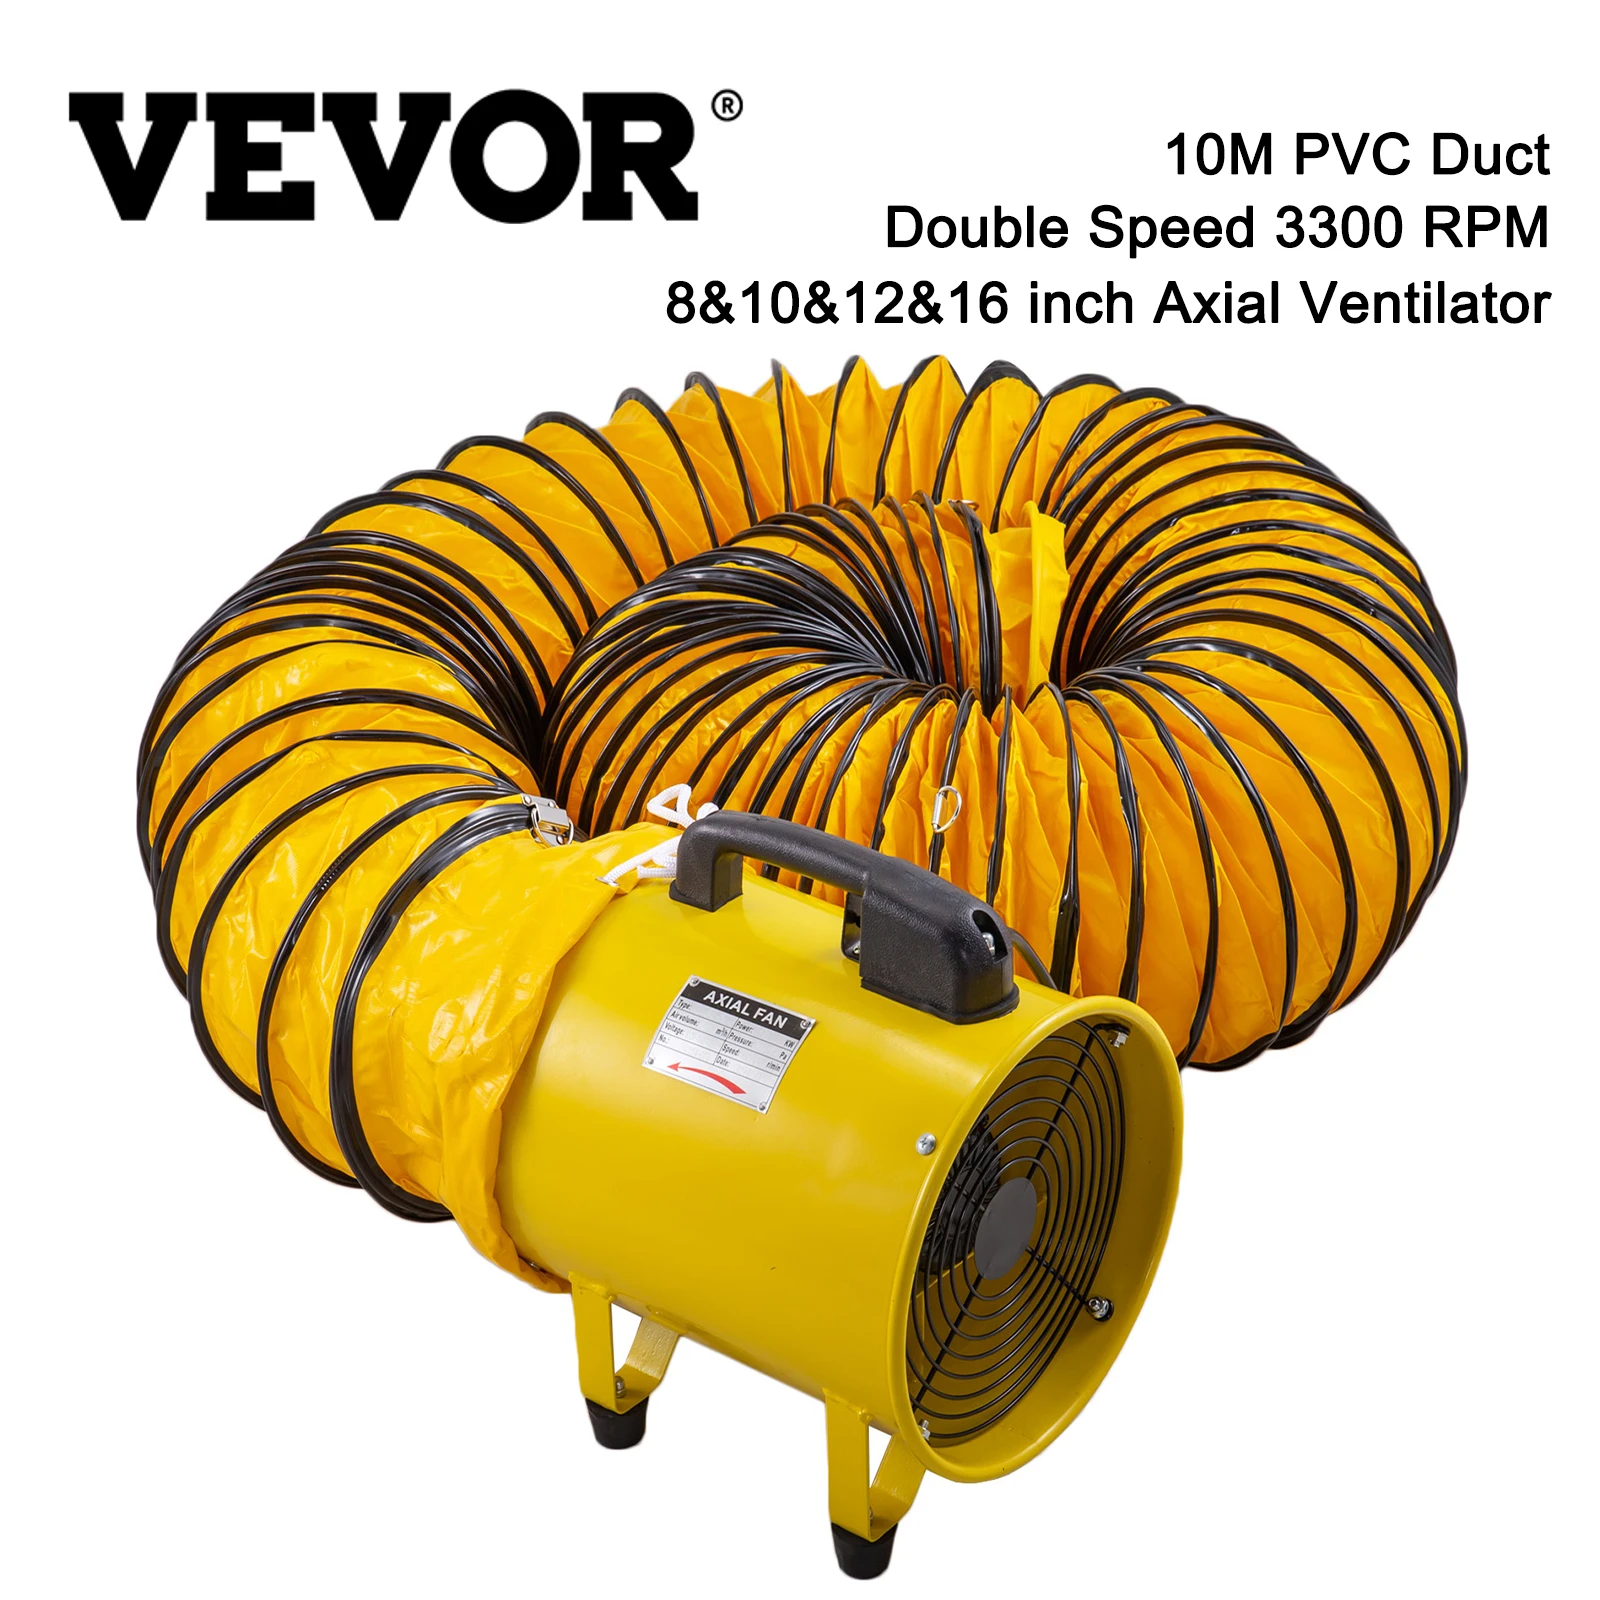 

VEVOR 8" 10" 12" 16" Industrial Axial Ventilator Double Speed Portable Air Blower Fan 10M Duct High Velocity tunnel Ventilation